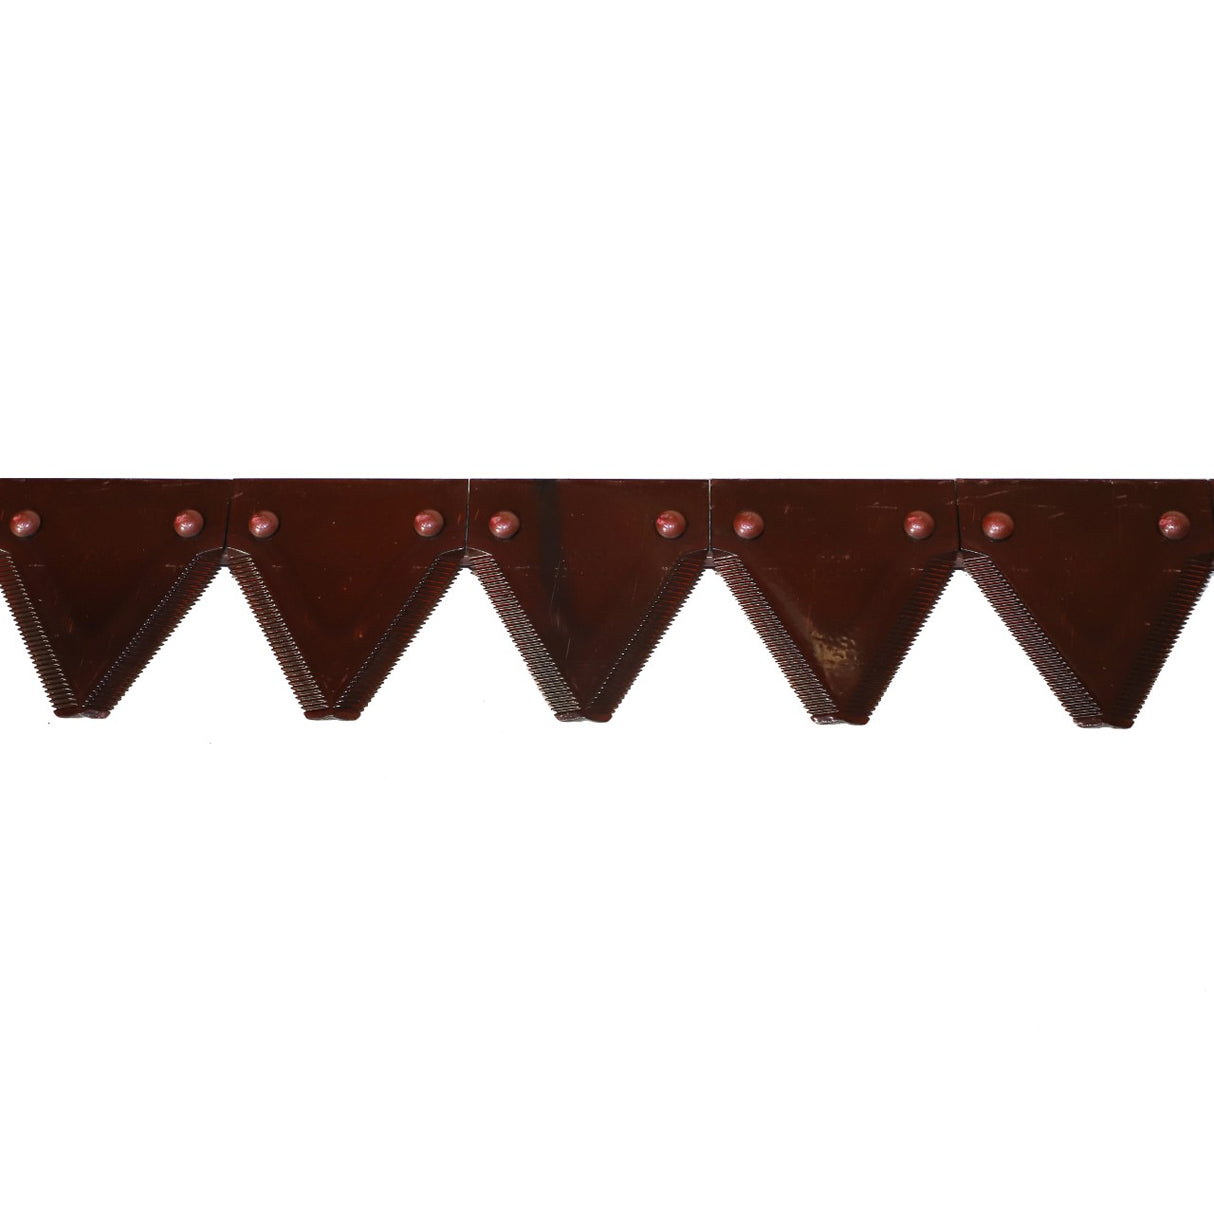 AGCO | Cutting Header With Knife Head 20Ft, Cutting Header - D28283010